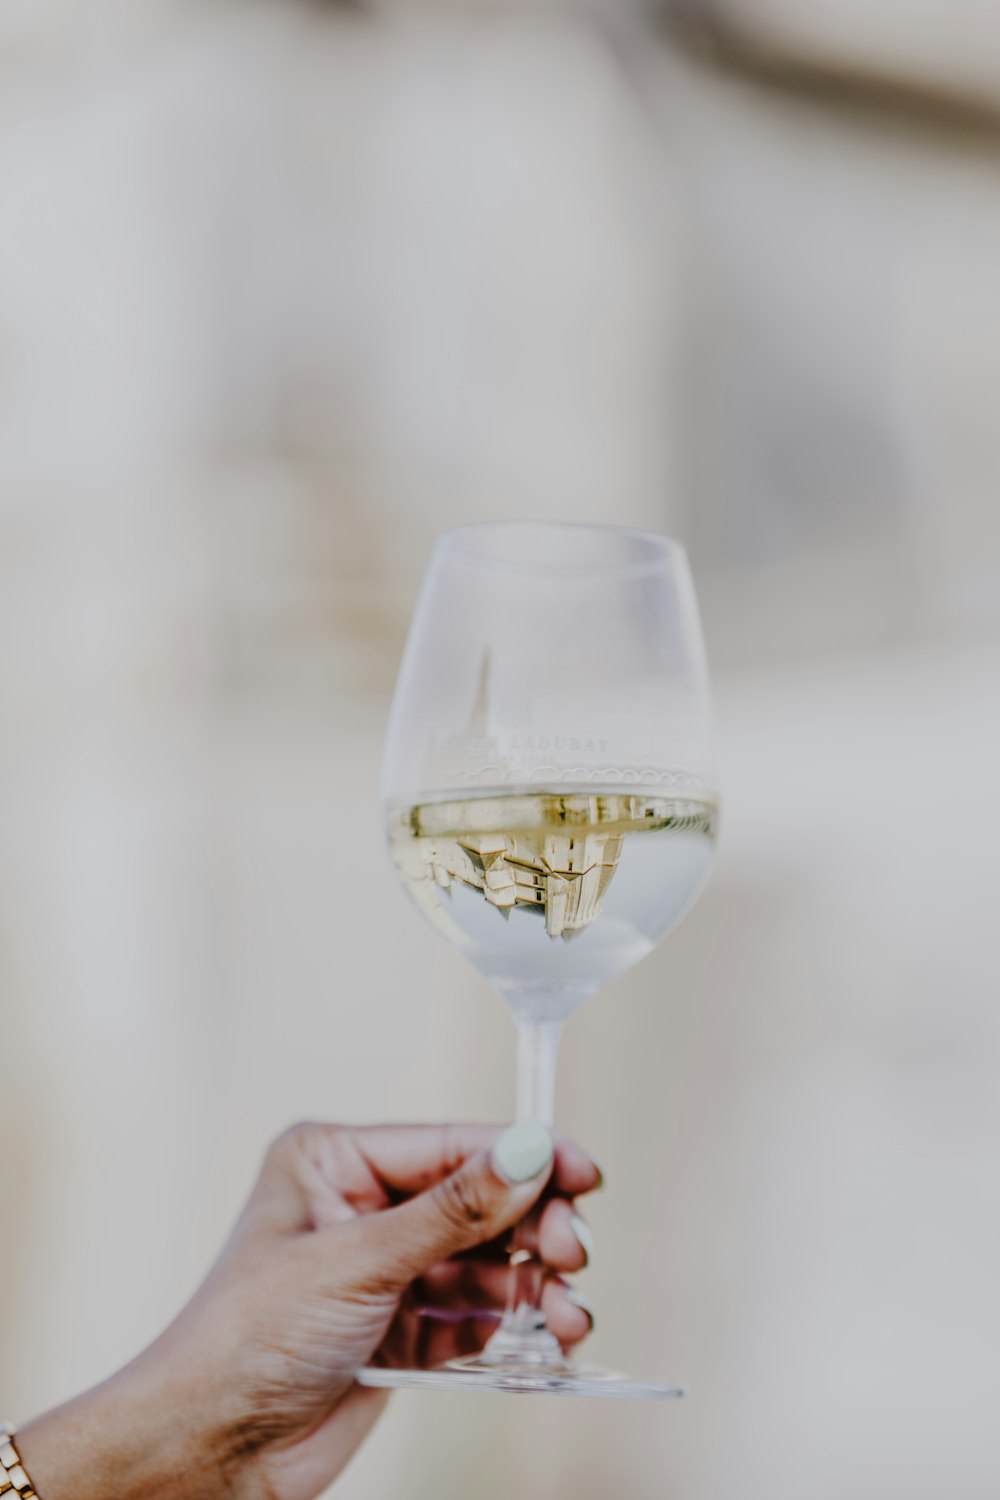 a person holding a wine glass with white wine in it